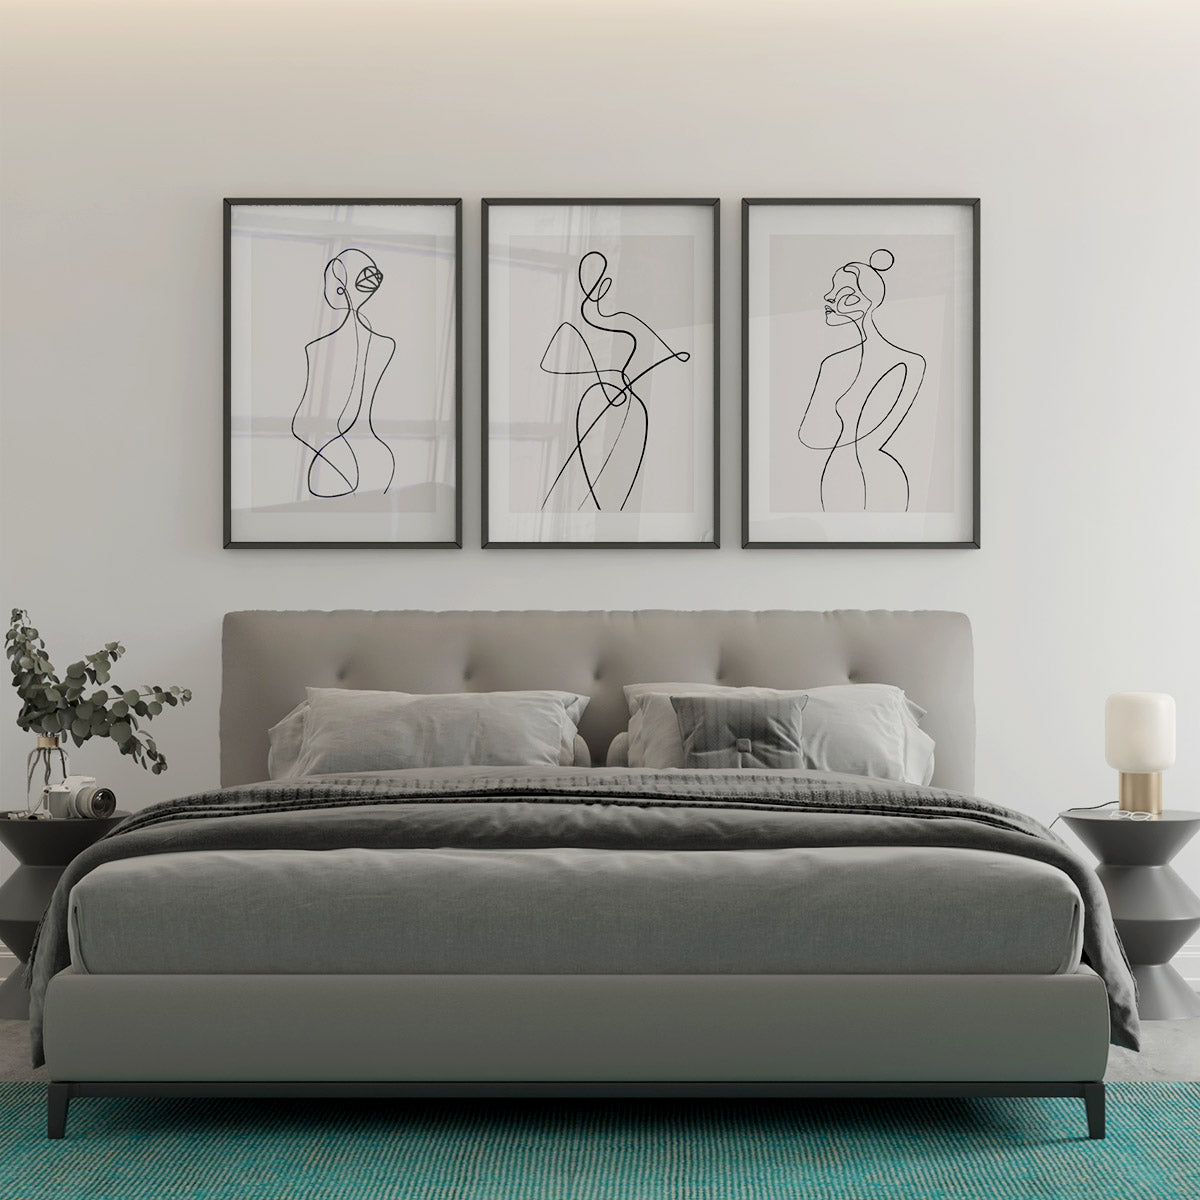 A set of 3 abstract line art prints hanging above a bed